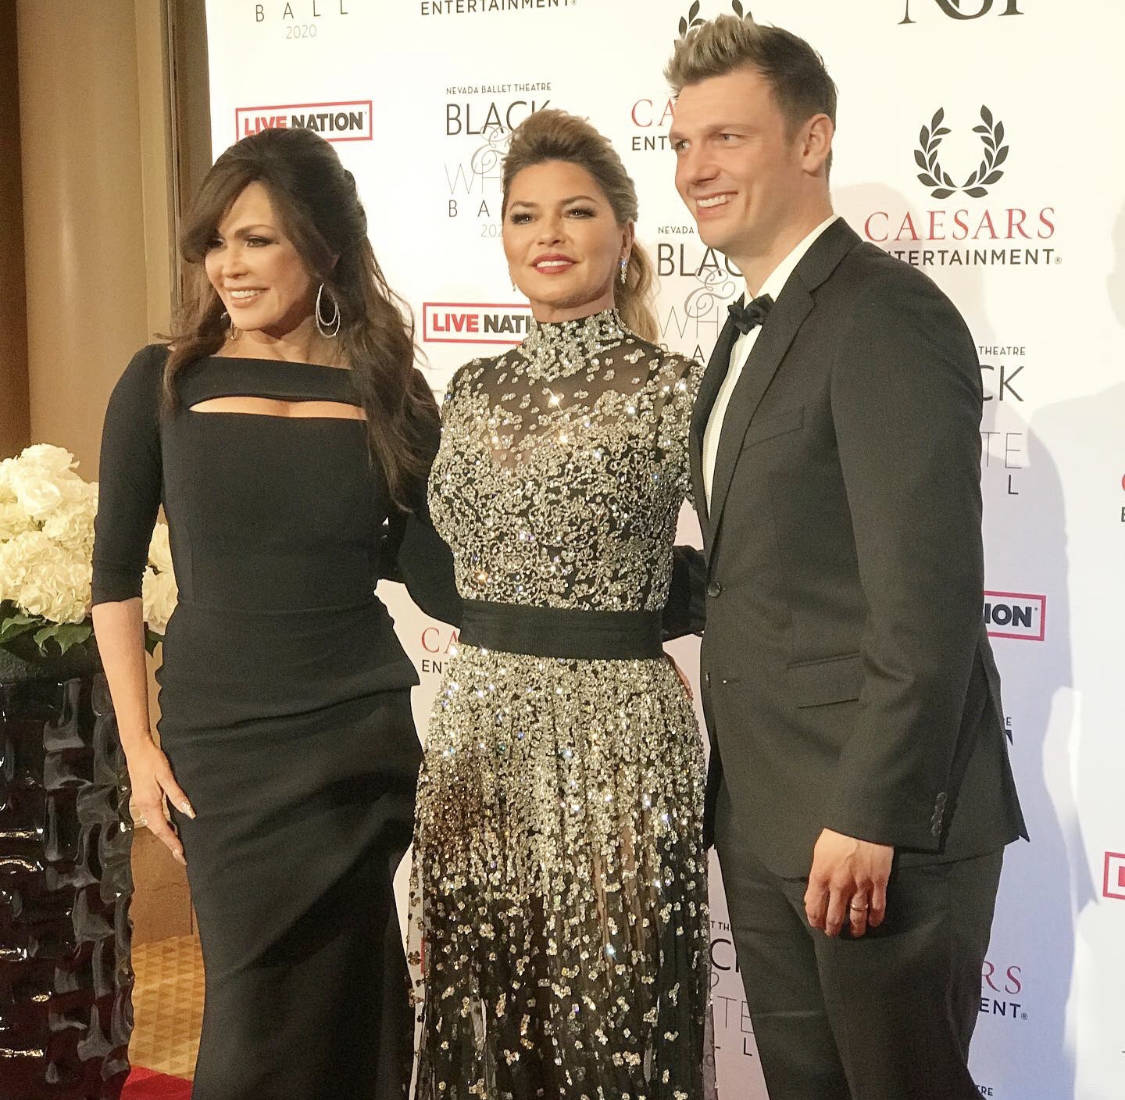 Shania Twain is shown with Marie Osmond and Nick Carter of the Backstreet Boys at the Nevada Ba ...